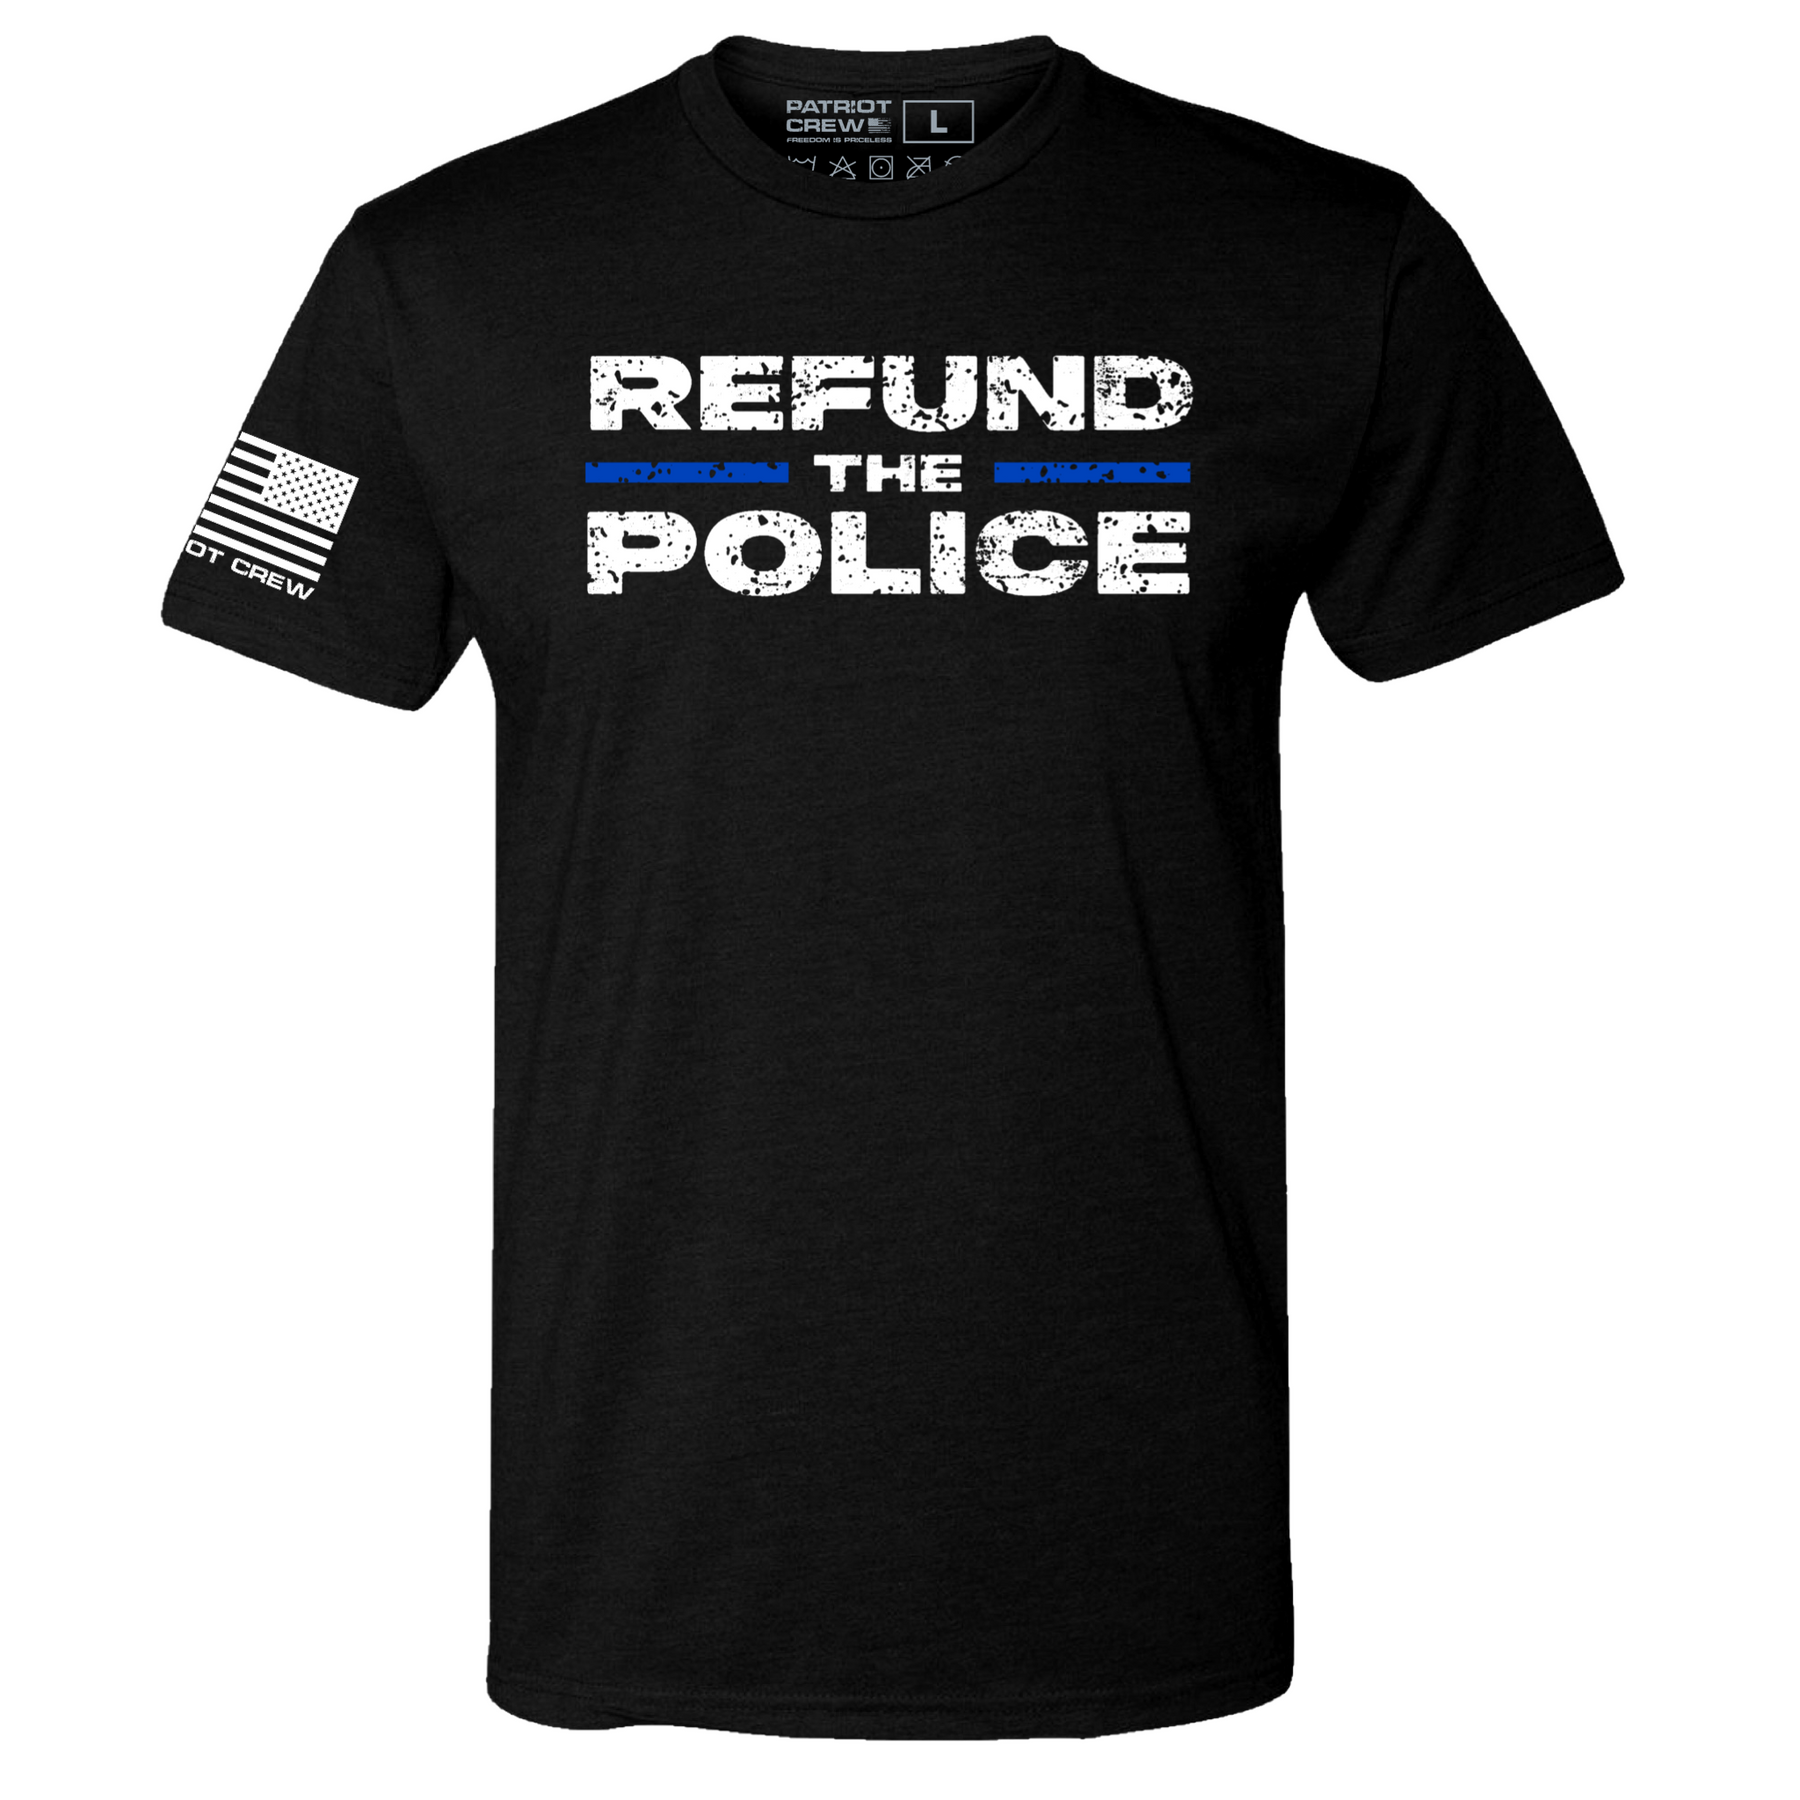 Refund The Police T-Shirt